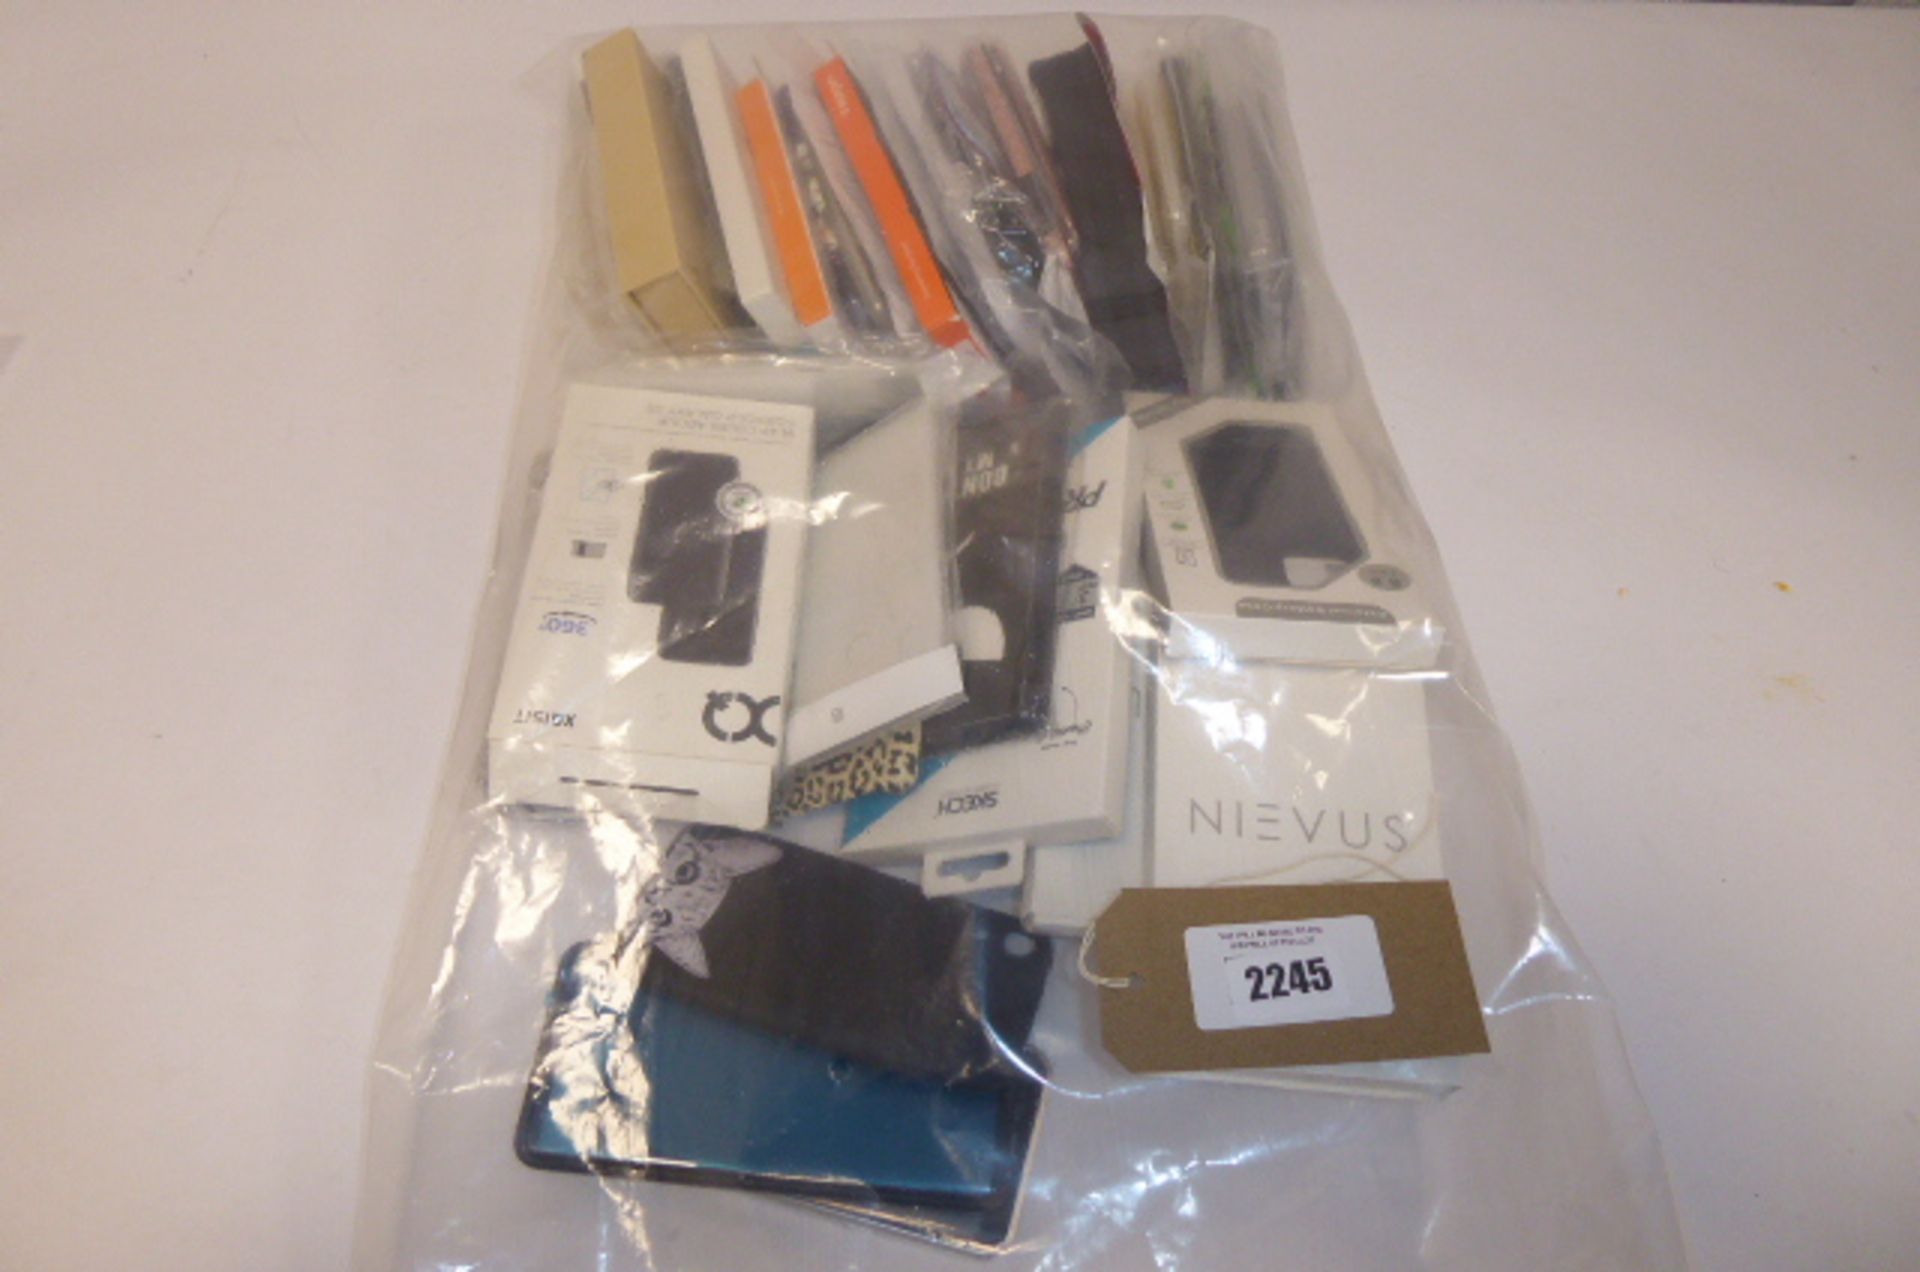 Mobile phone protective cases and covers, etc.